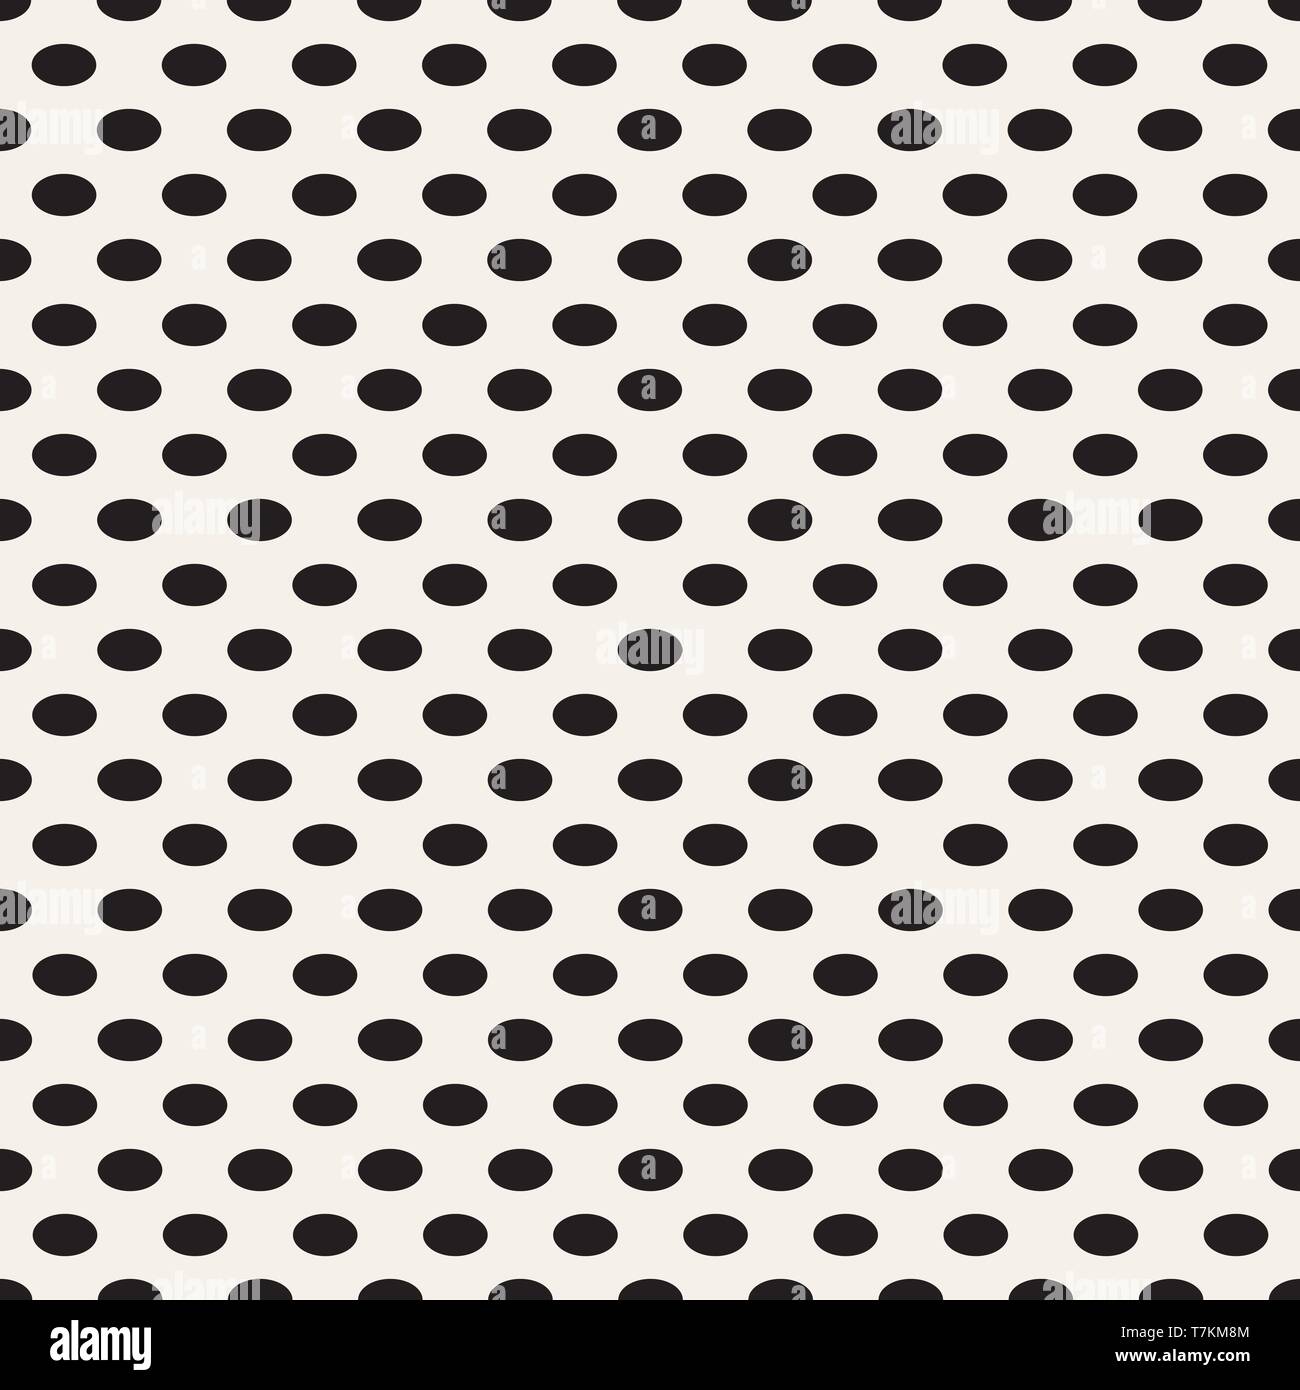 Oval vertical point. Black dots on white background. Vector seamless pattern. Stock Vector